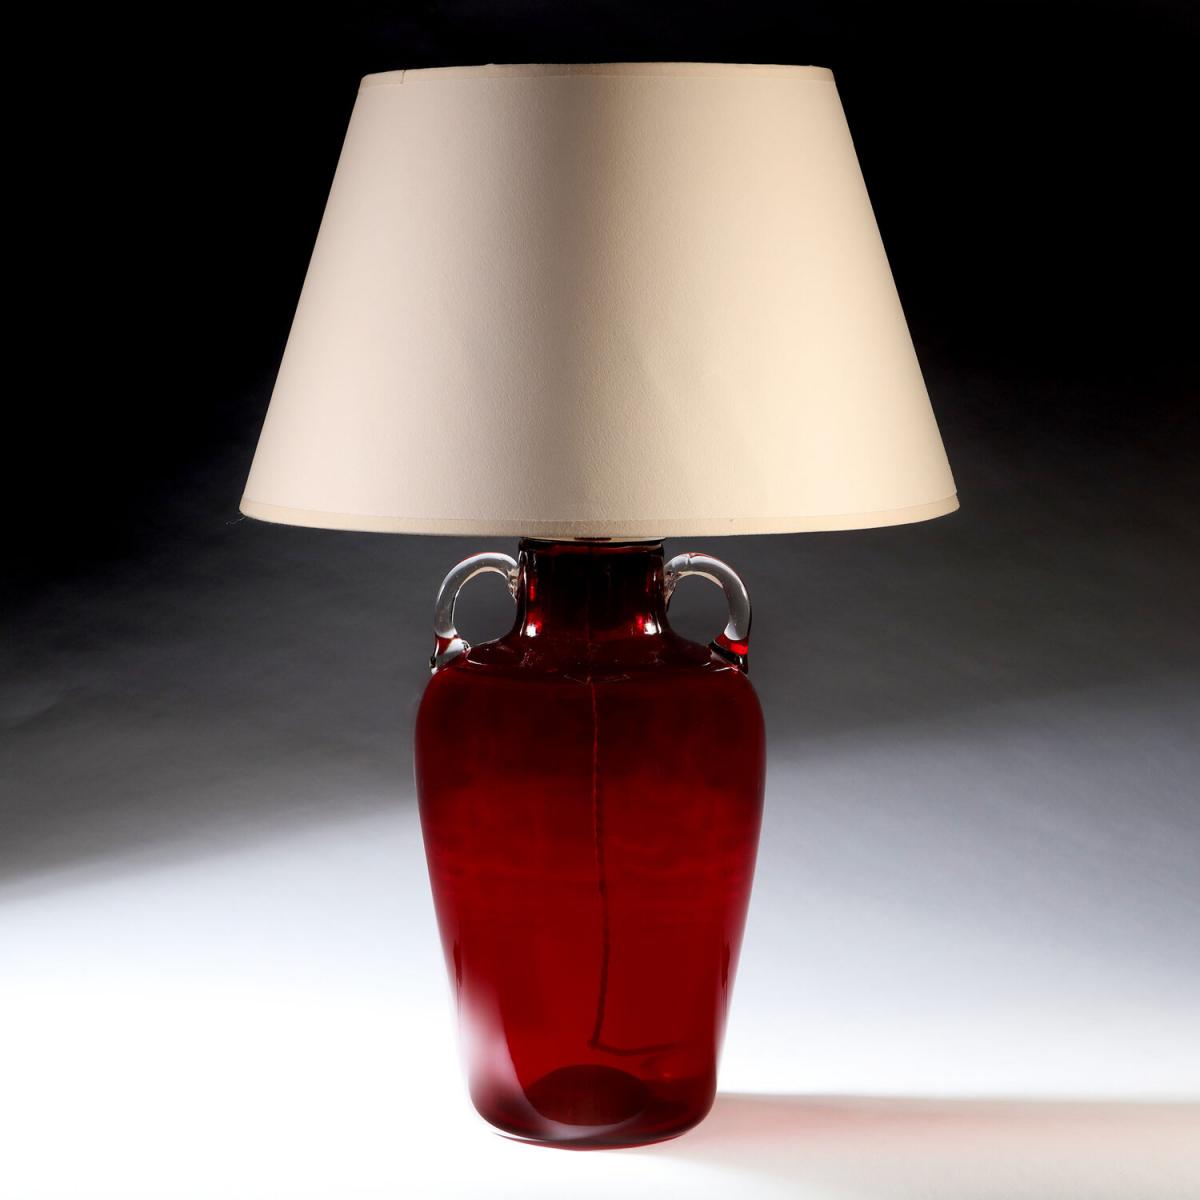 A Large Red Murano Vase as a Lamp